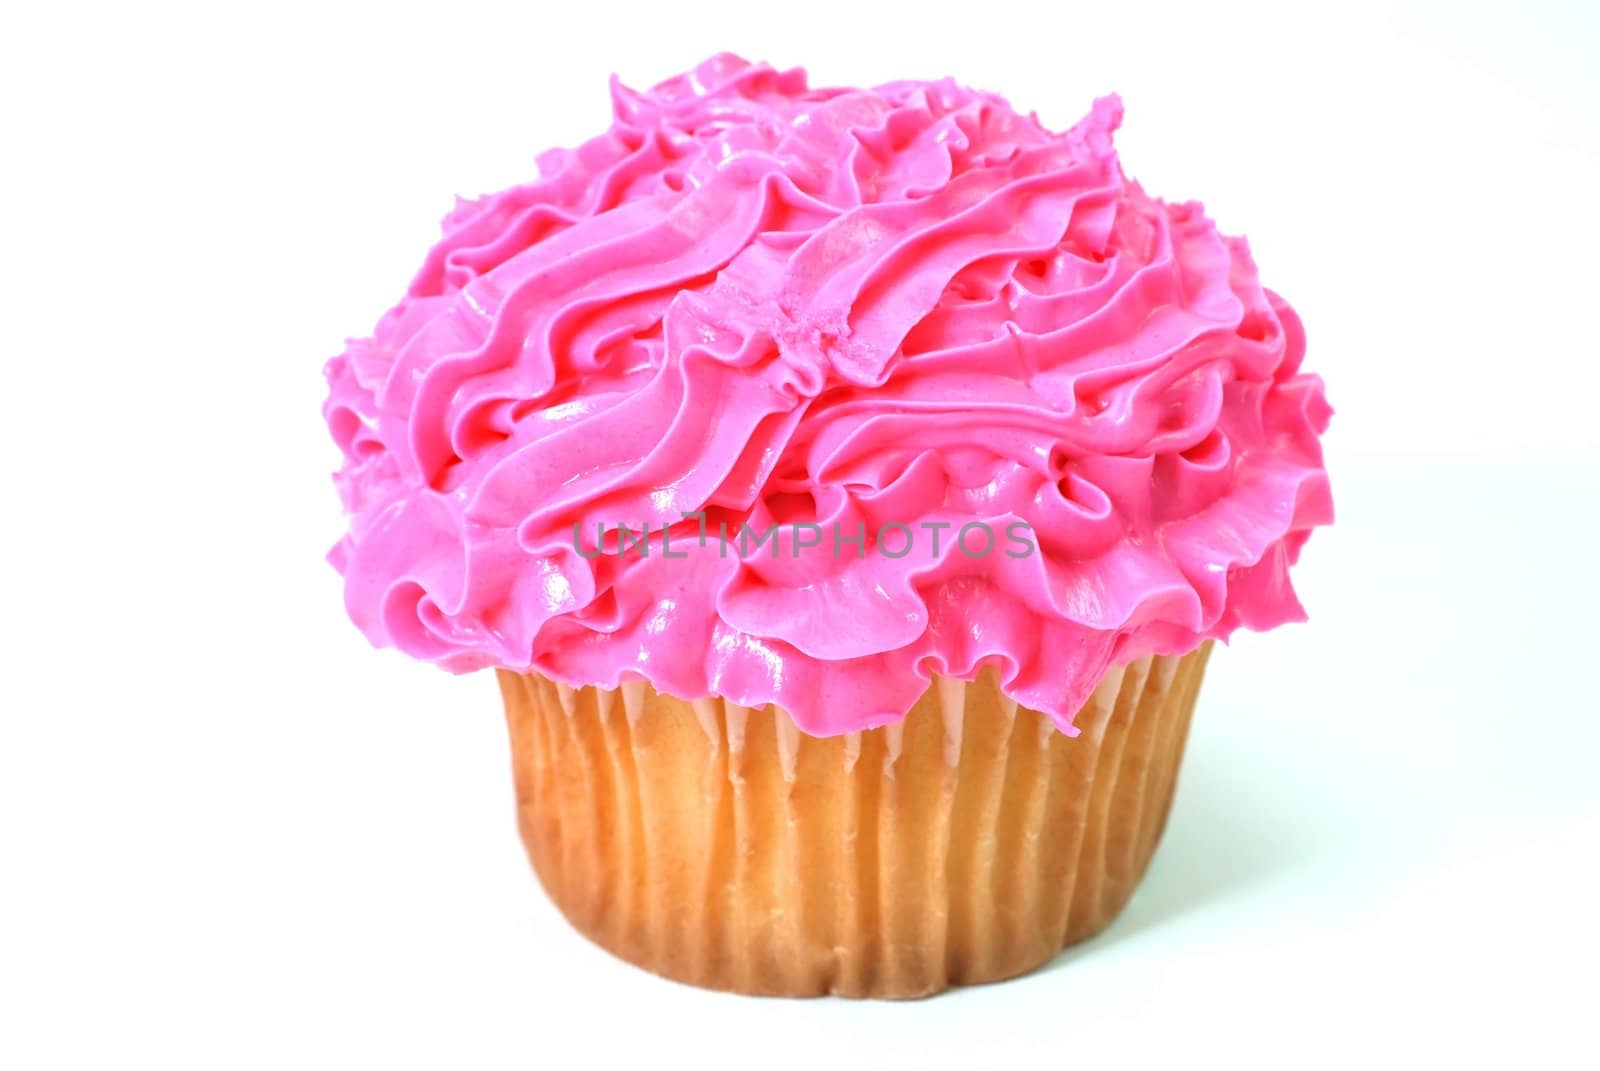 Cupcake with pink decorative frosting.  Isolated on white background.